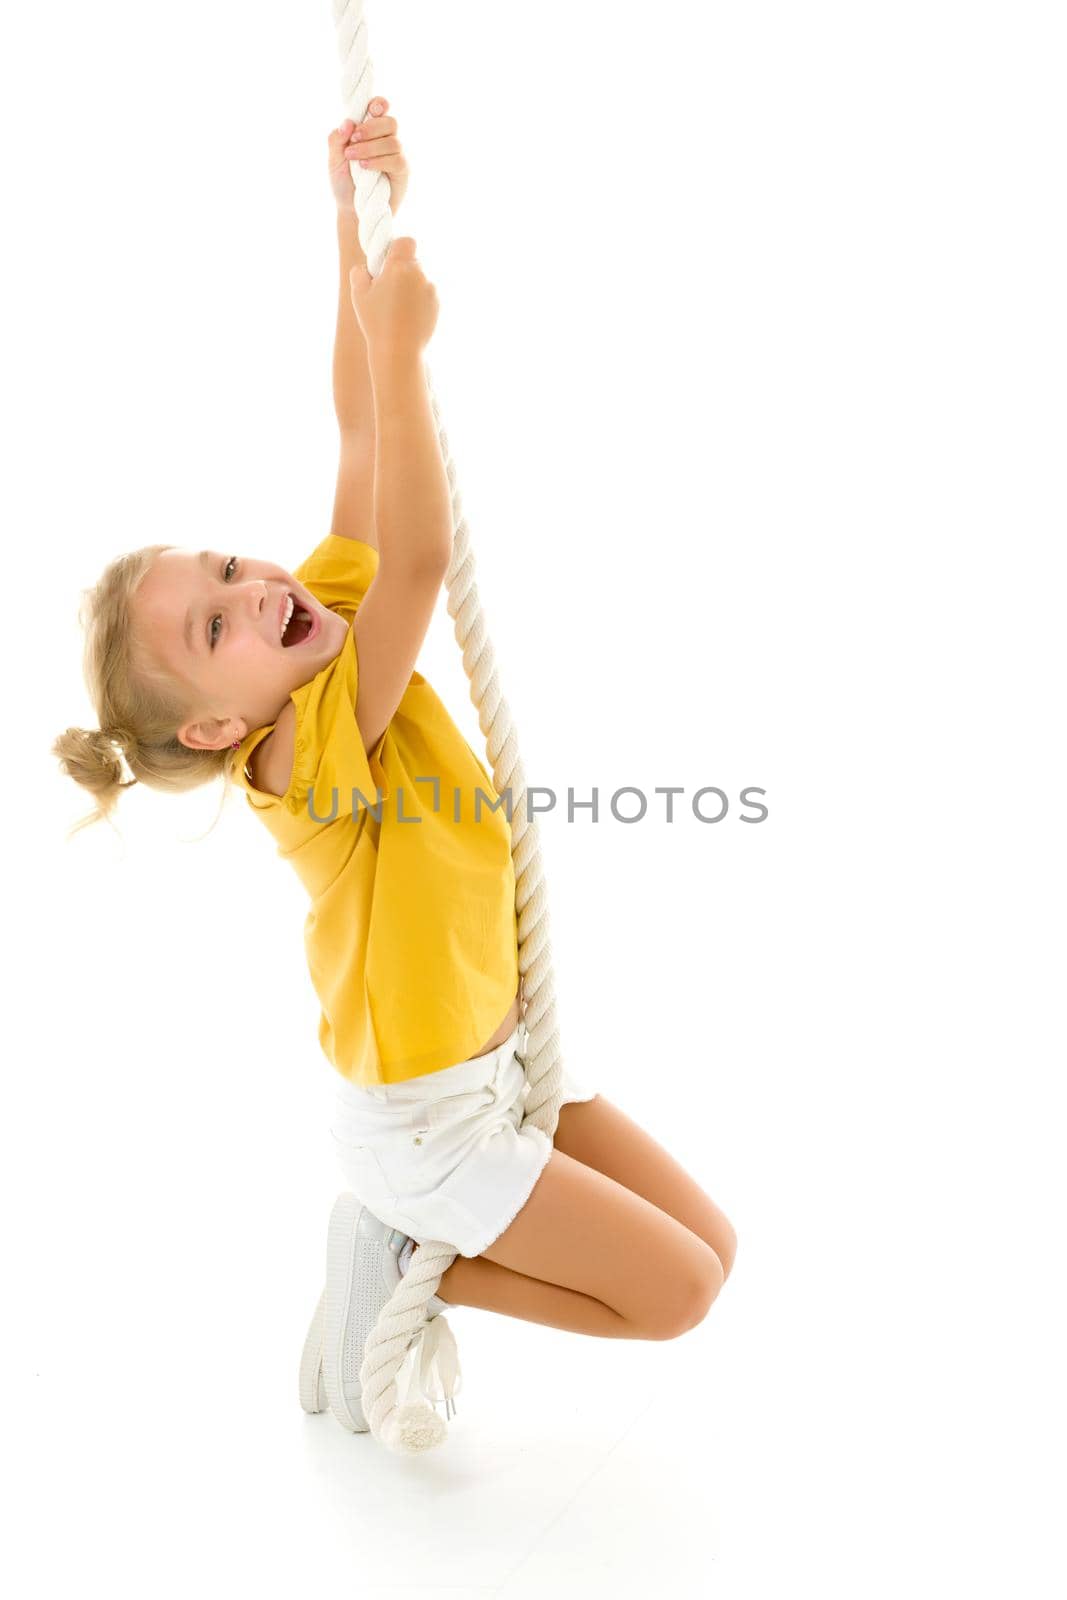 Cheerful little girl holding a rope with her hands. She tries to swing from side to side on it. Sport, fitness concept. Isolated over white background.